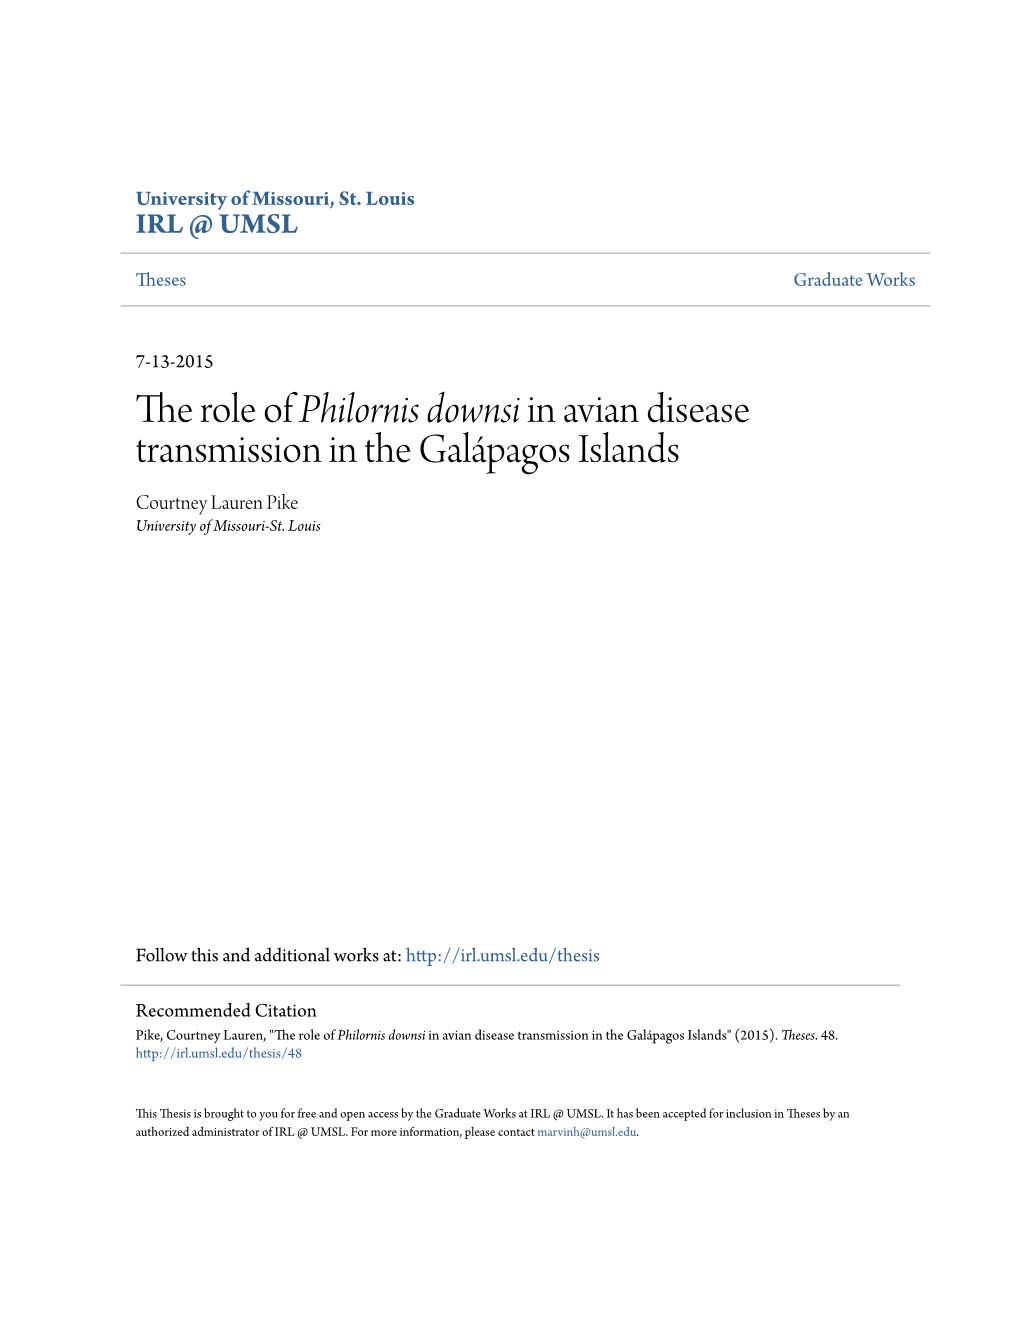 The Role of &lt;I&gt;Philornis Downsi&lt;/I&gt; in Avian Disease Transmission in The